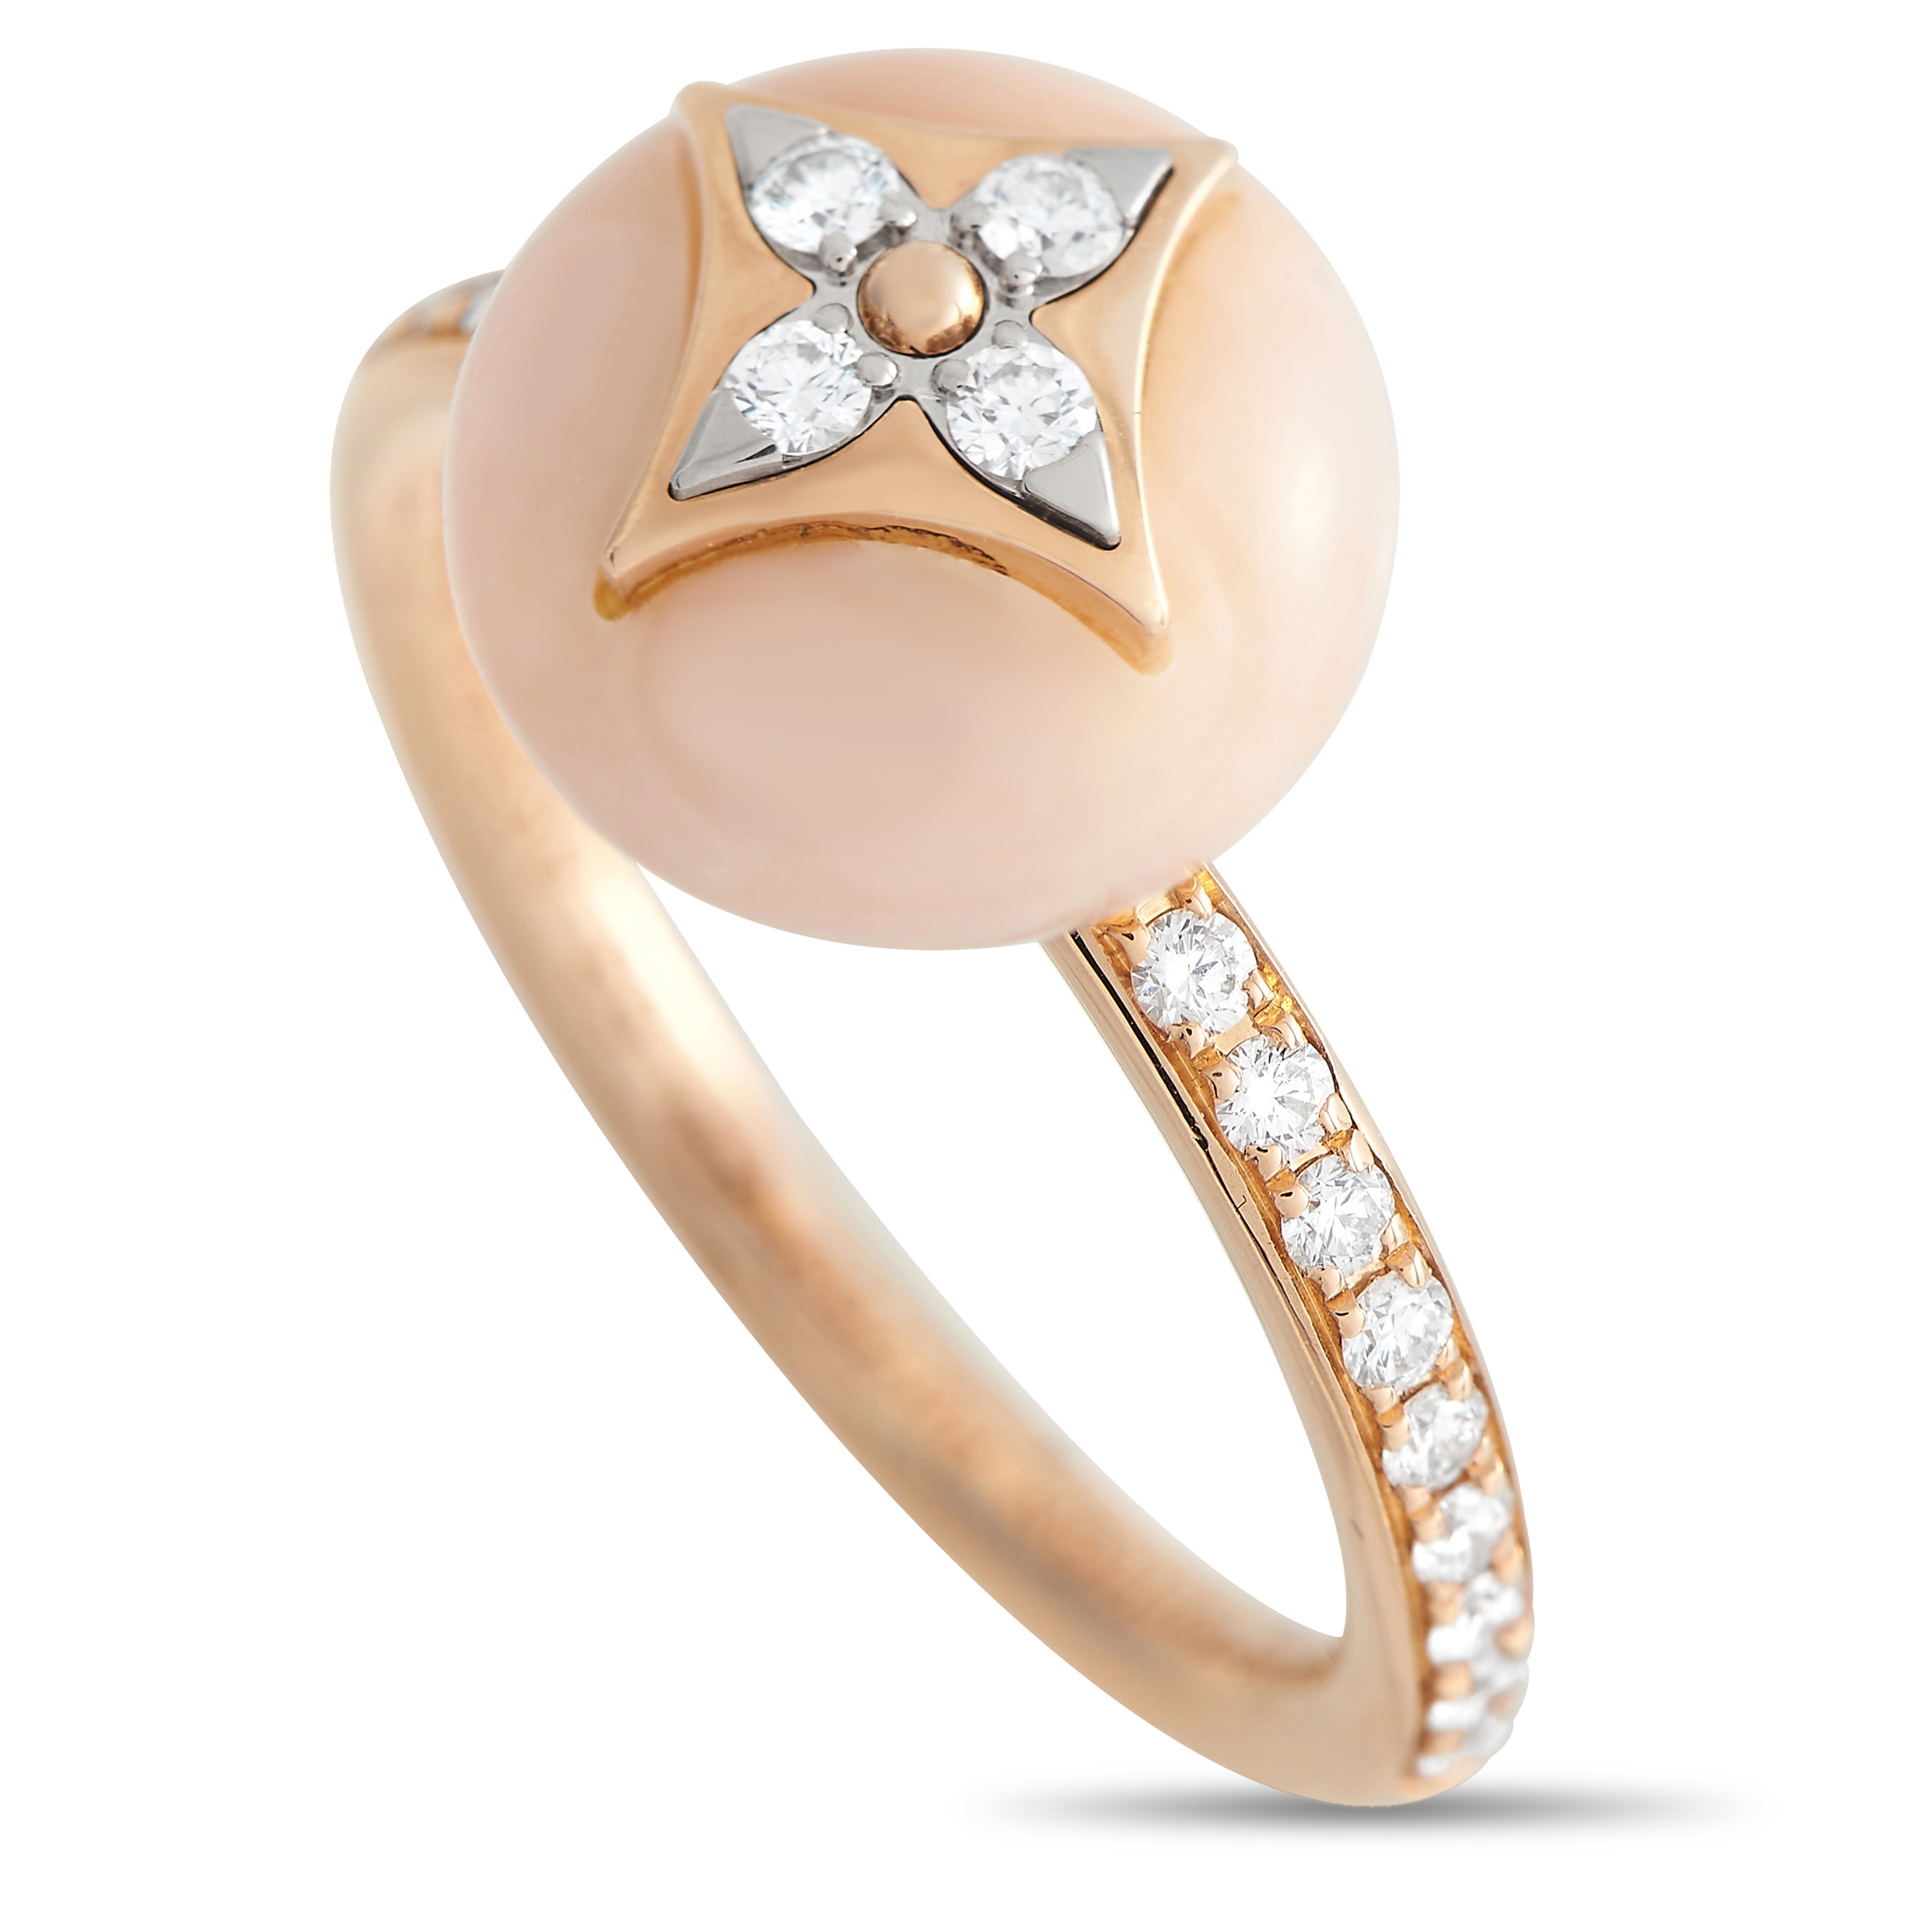 Louis Vuitton Color Blossom Ring, Pink Gold, White Gold, Pink Opal and PavÃ Diamond. Size 50